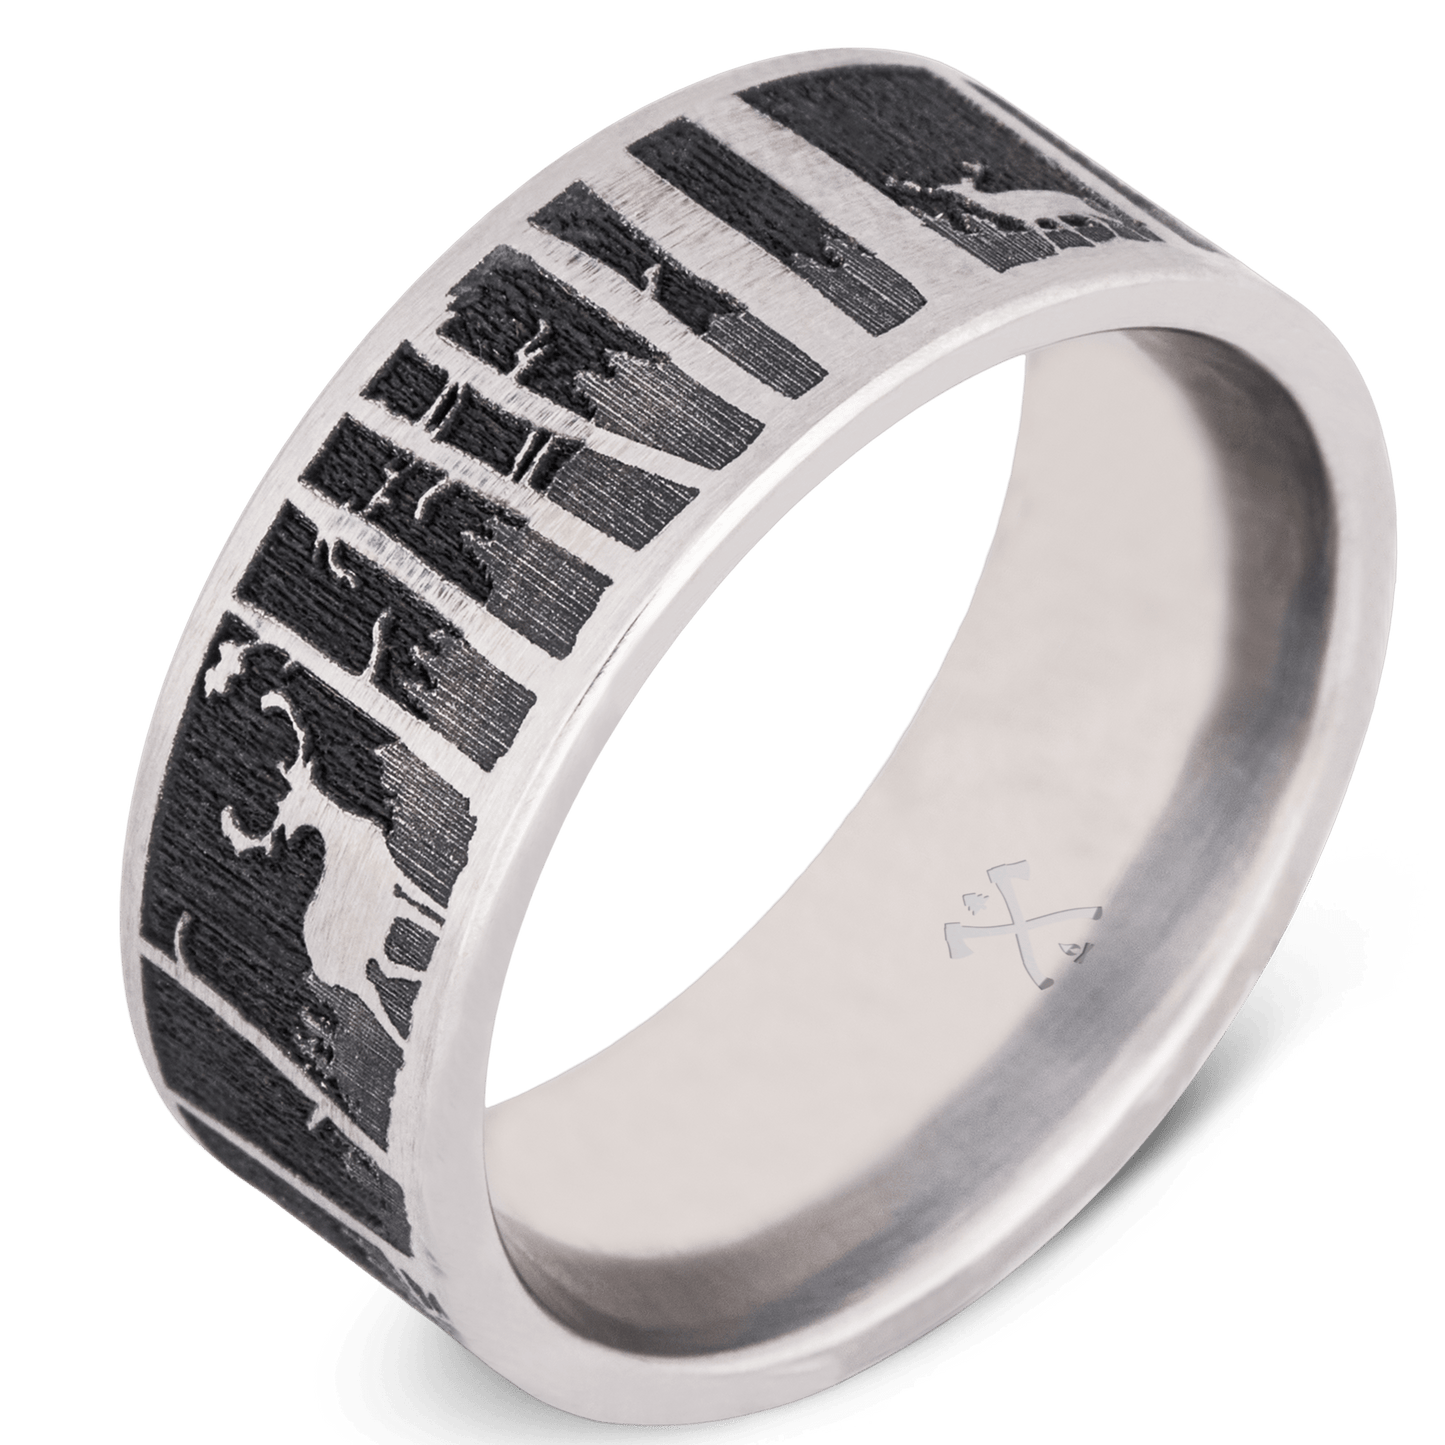 The Outdoorsman - Men's Wedding Rings - Manly Bands